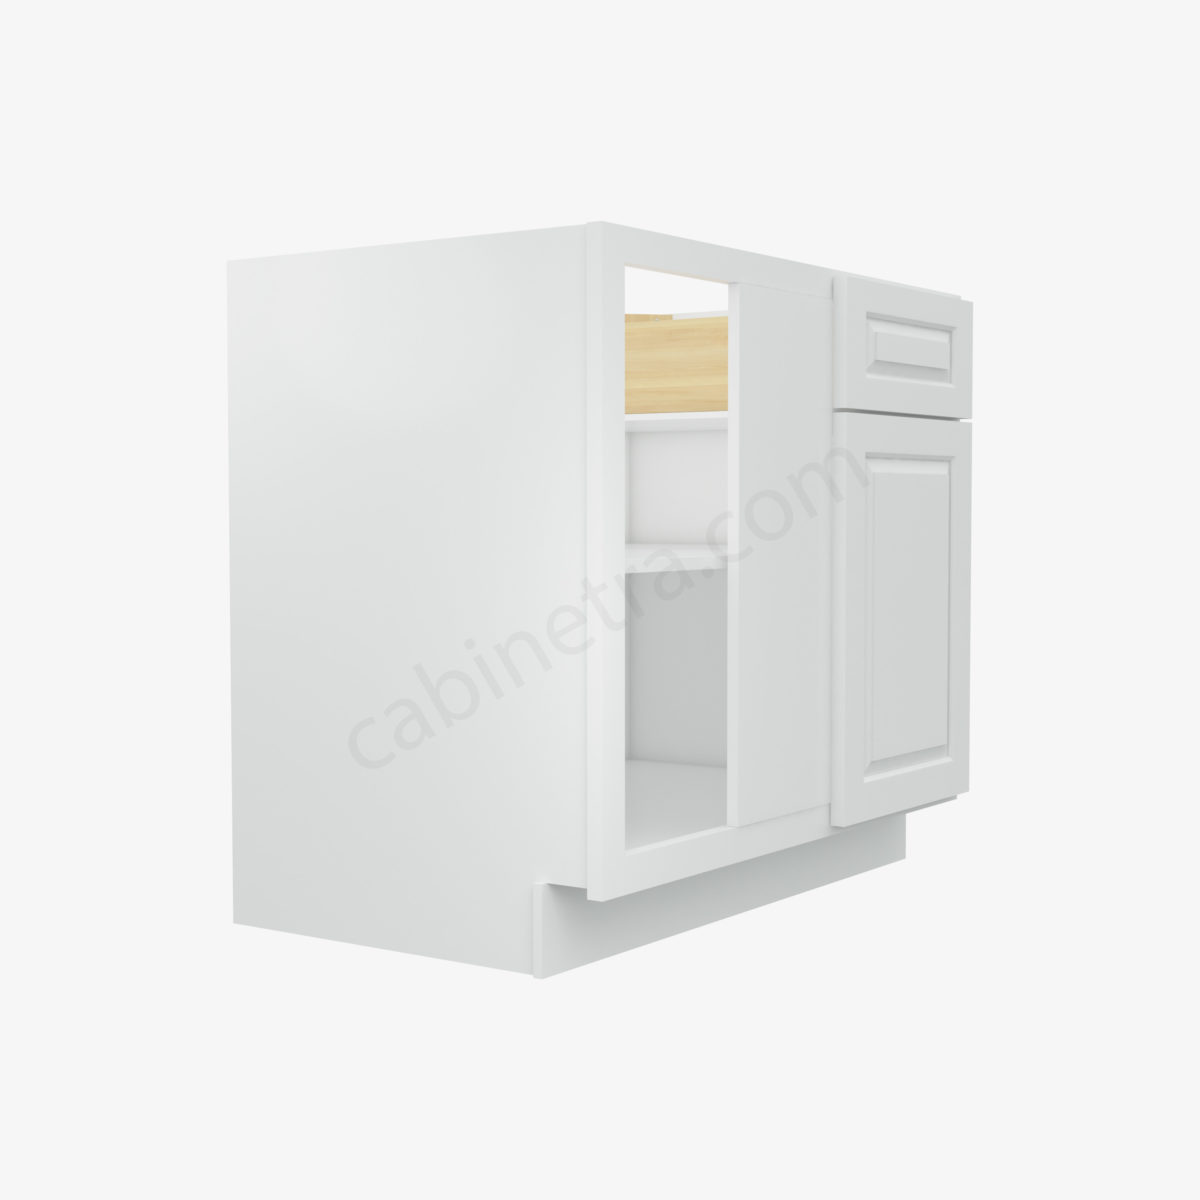 GW BBLC39 42 36W 4  Forevermark Gramercy White Cabinetra scaled